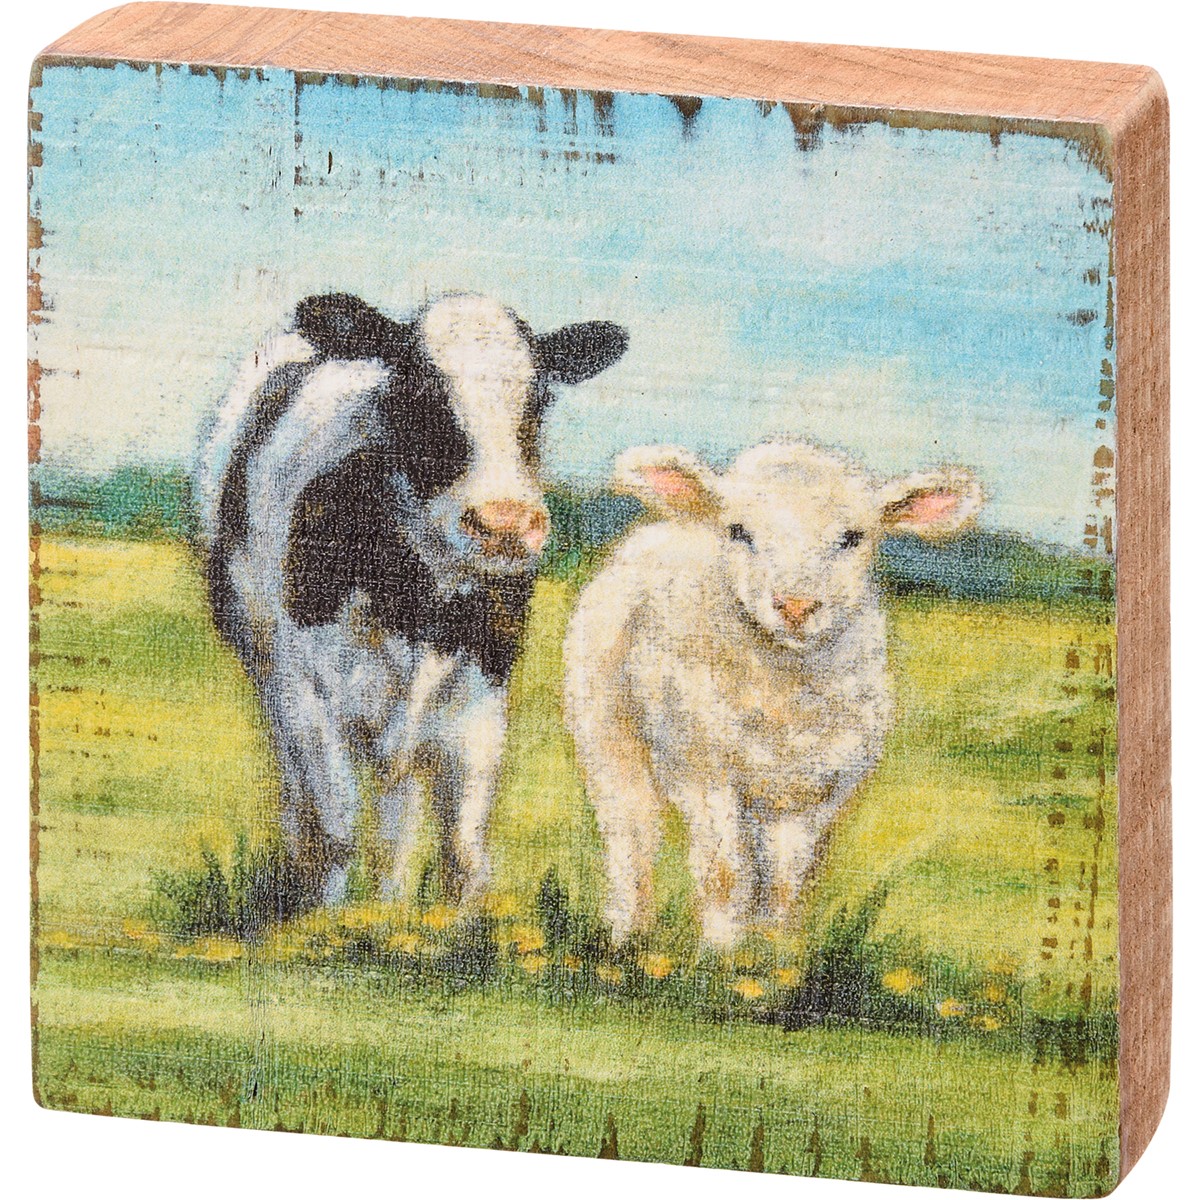 Cow And Sheep Block Sign - Wood